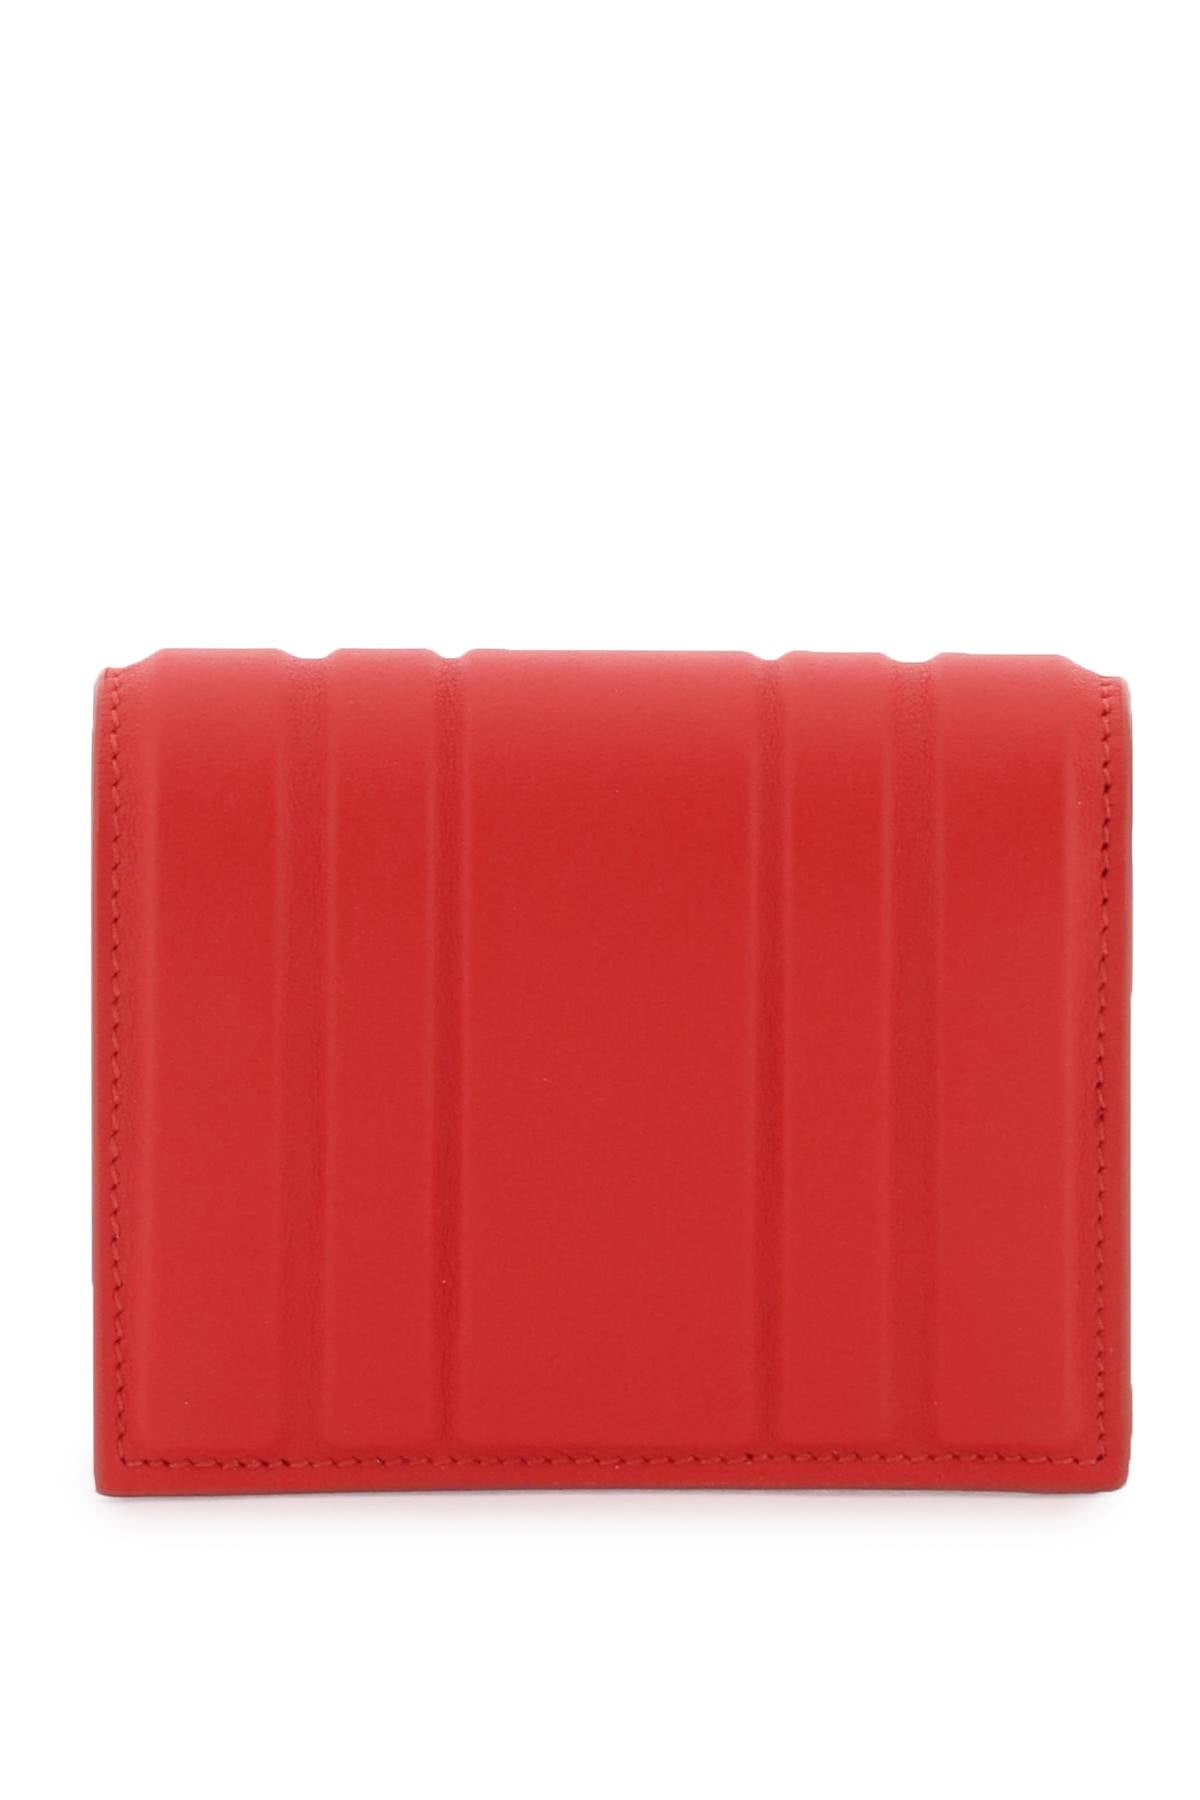 CHLOÉ Red Matte Leather Wallet with Gancini Hook Ornament for Women